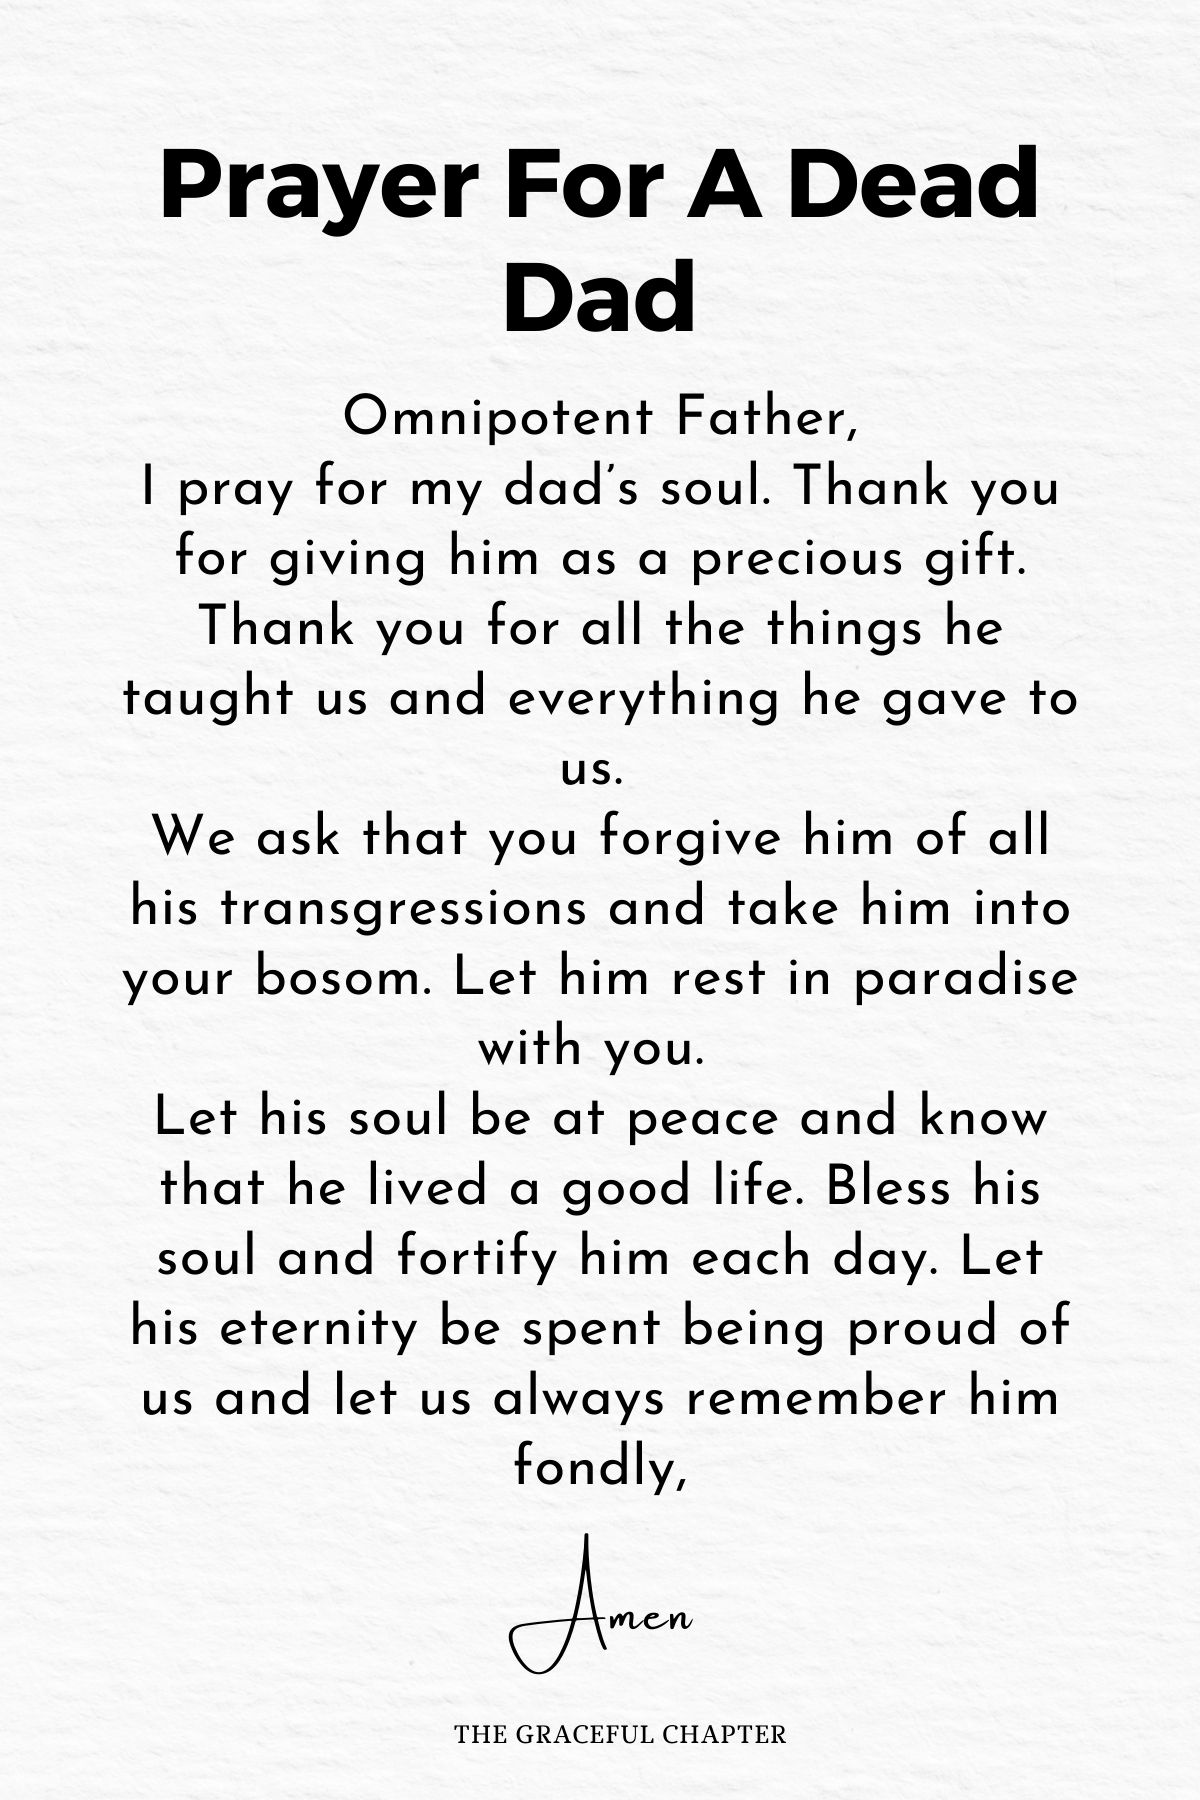 Prayer for a dead dad